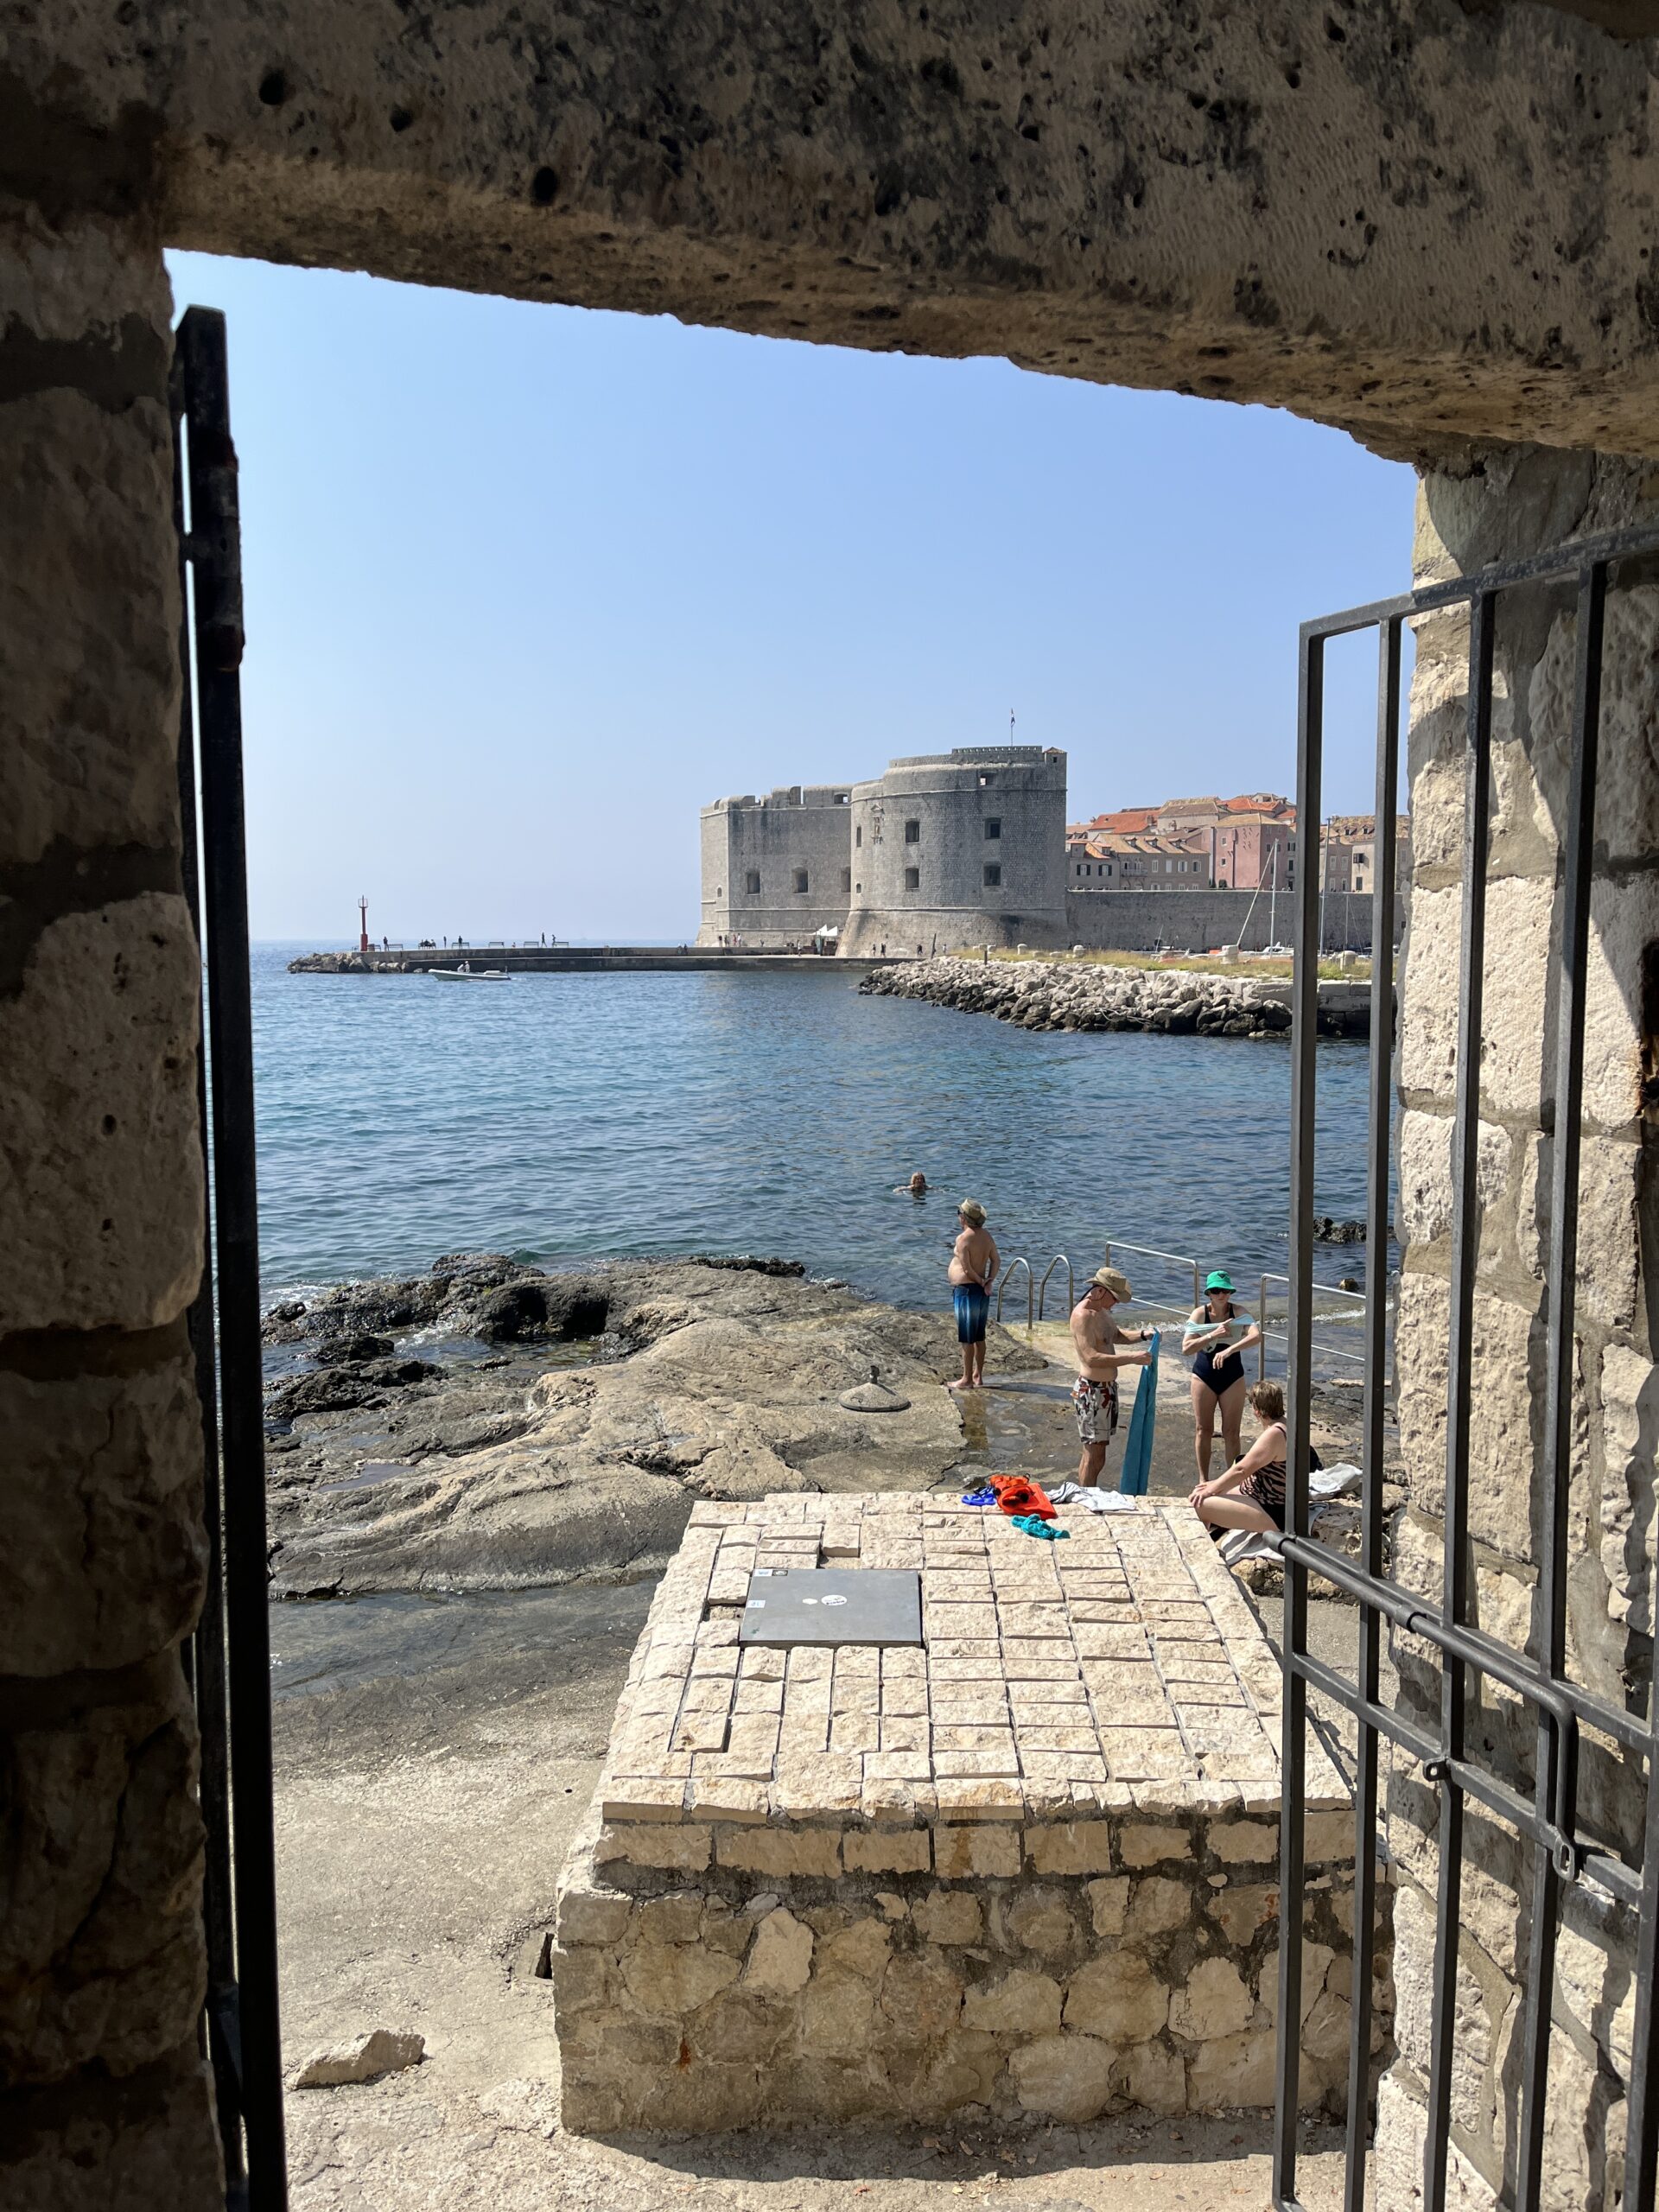 The city walls of Dubrovnik 